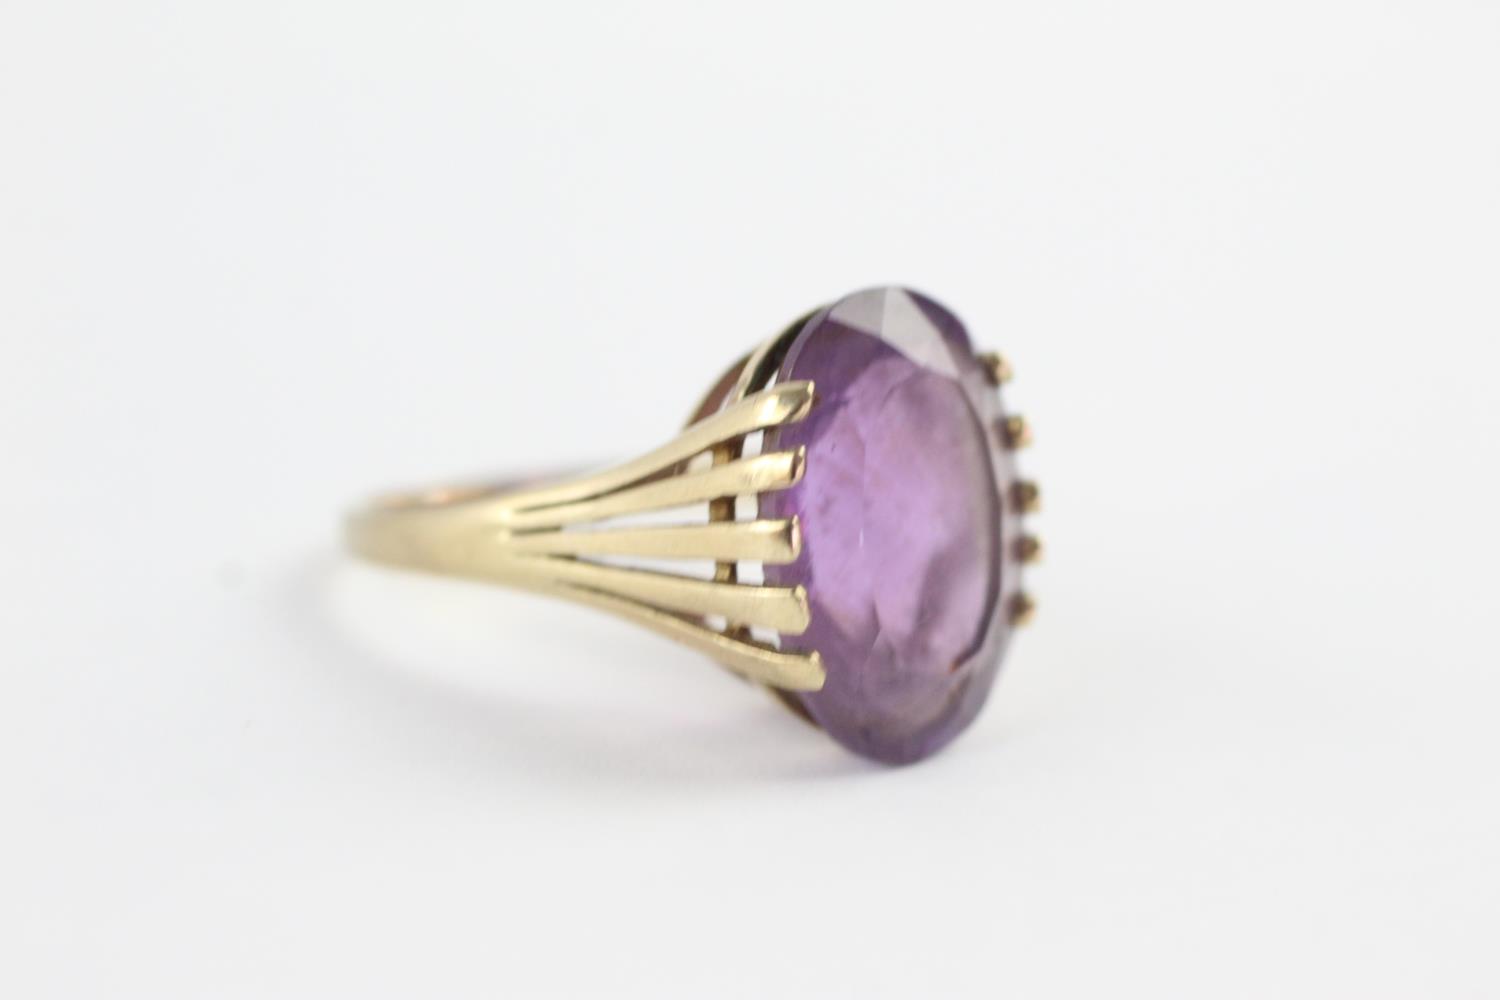 9ct gold amethyst high profile setting cocktail ring (3.8g) size O - Image 3 of 9